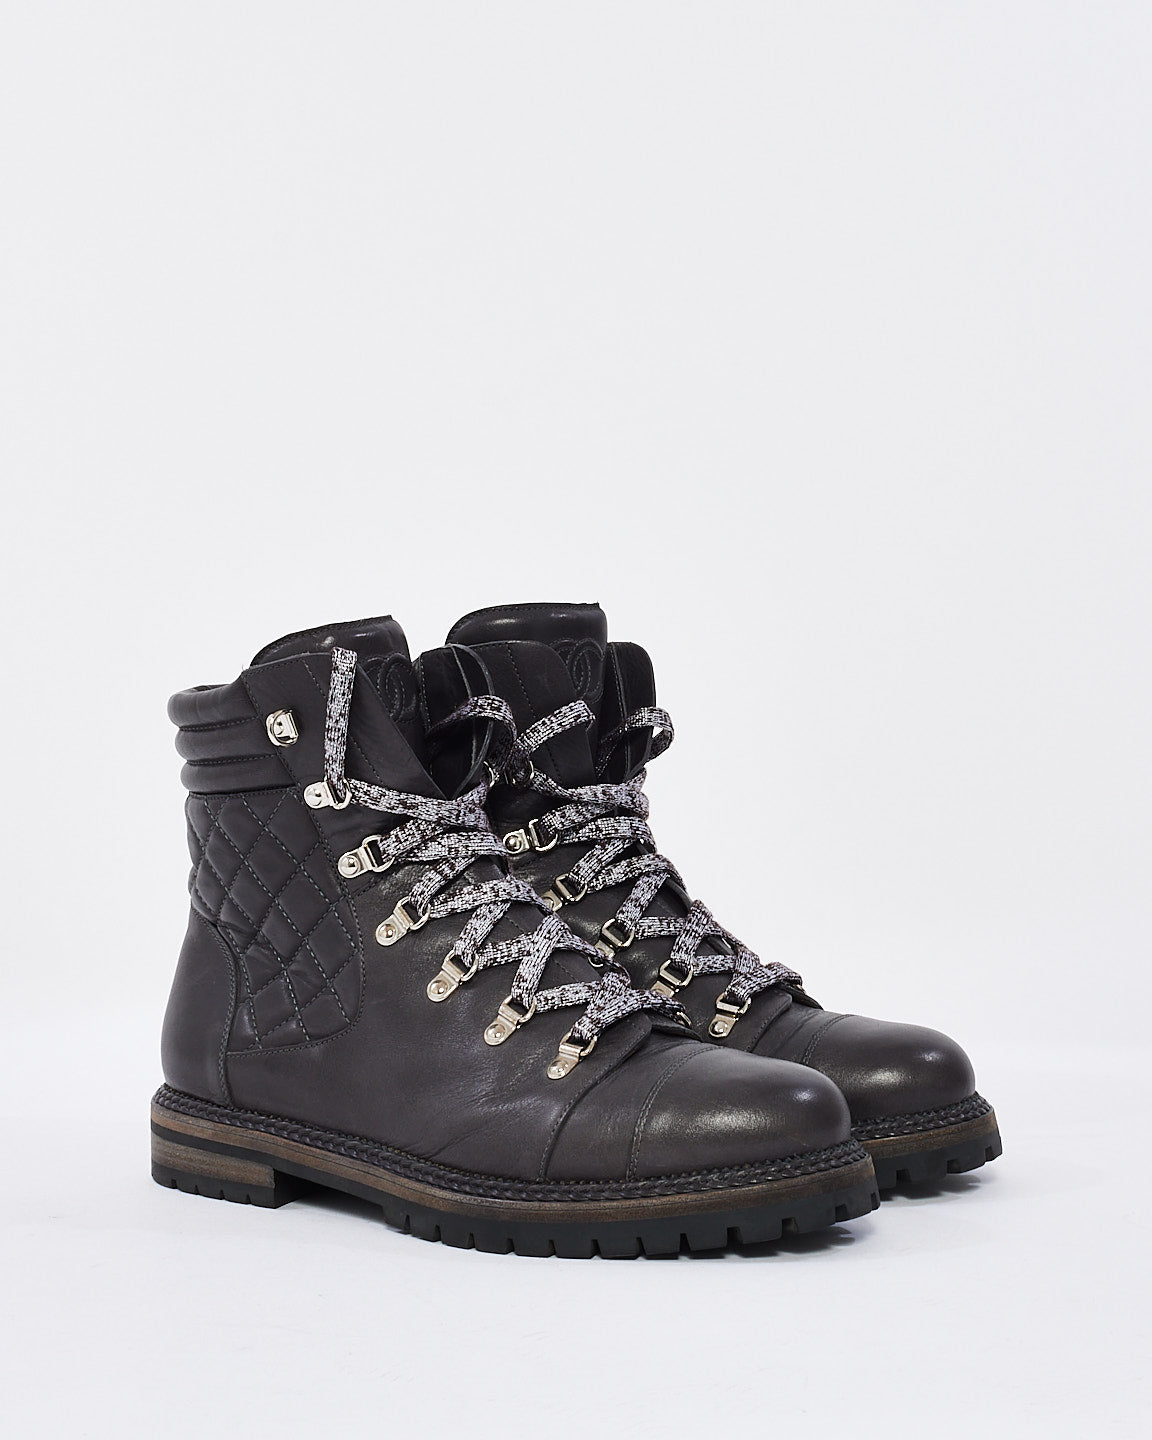 Chanel Black Quilted Leather Combat Boots - 43